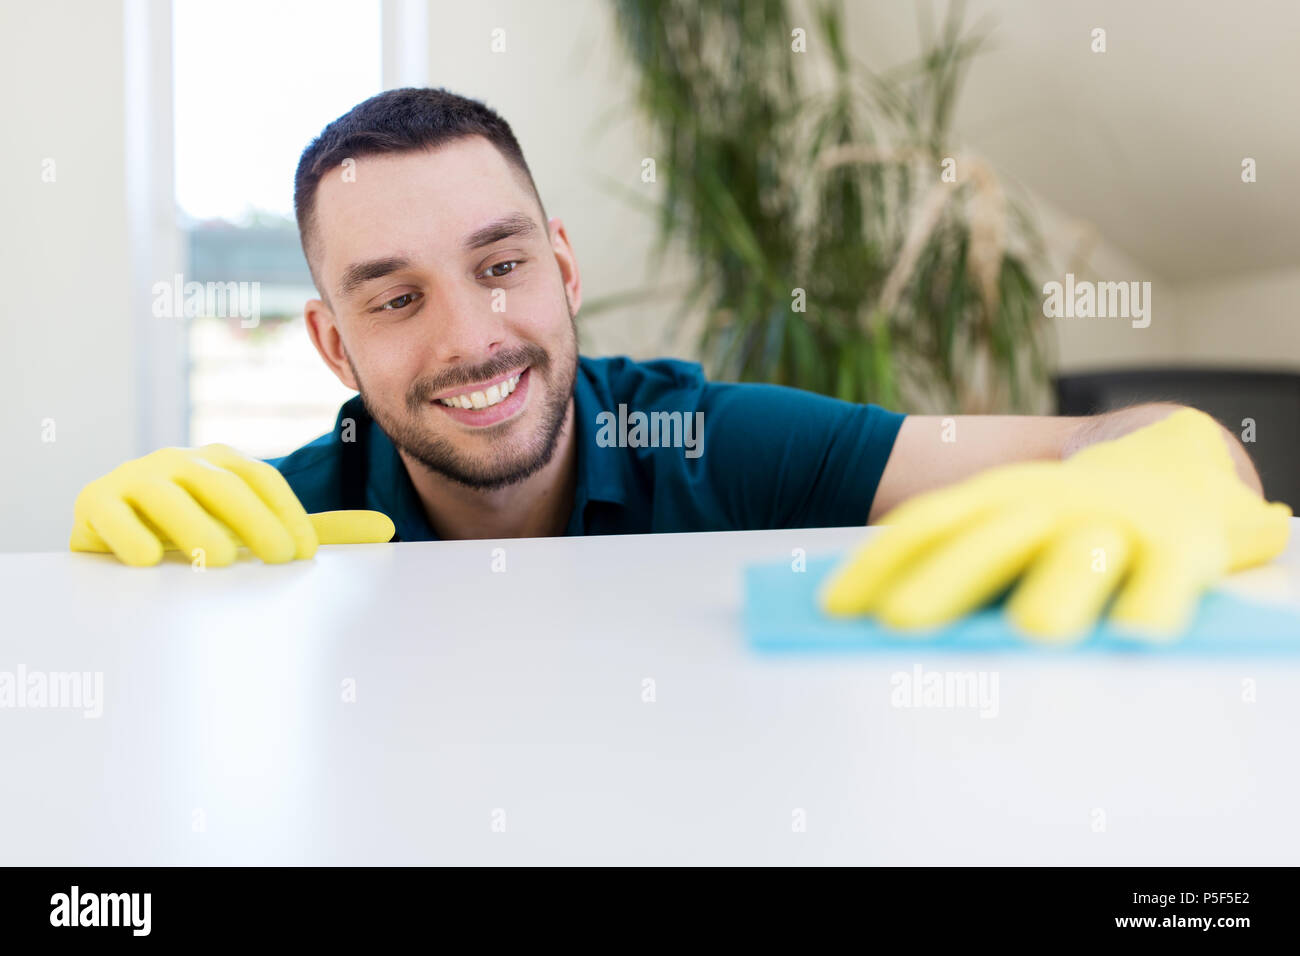 smiling man cleaning table with cloth at home Stock Photo